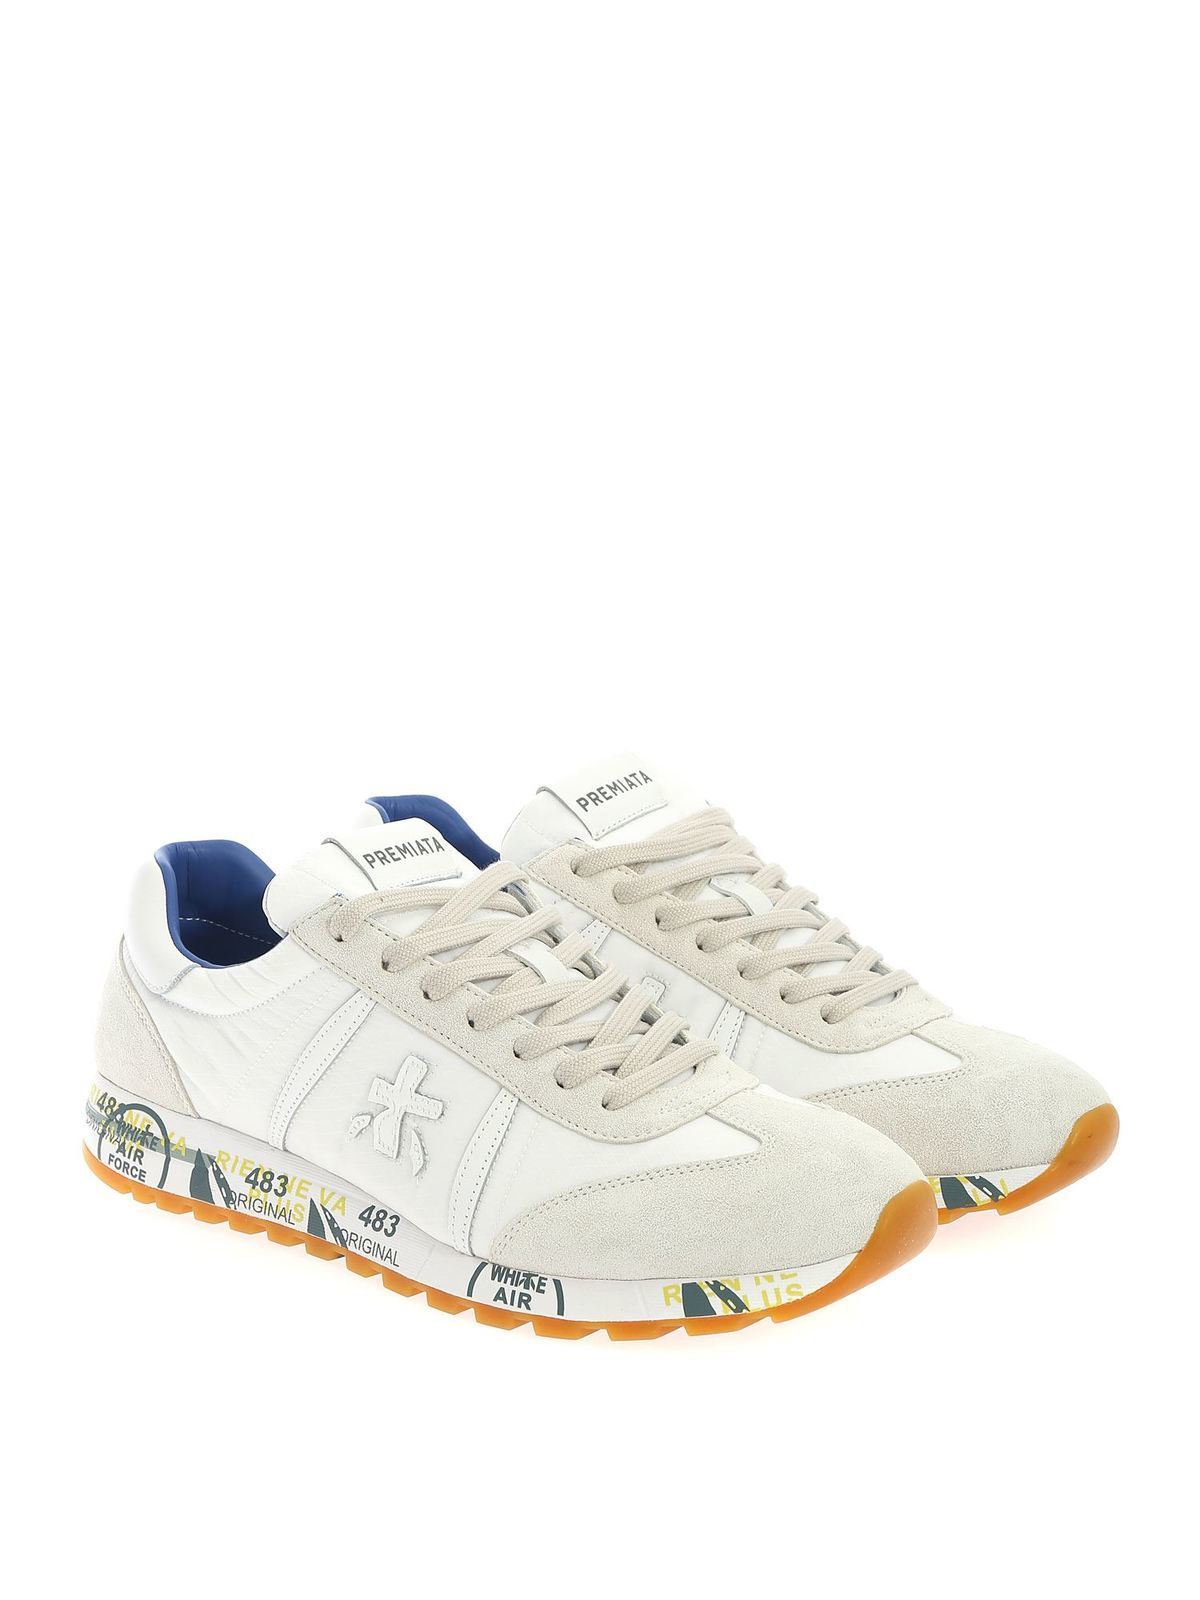 Premiata - Sneakers Lucy bianche - sneakers - LUCY4709 | iKRIX shop online